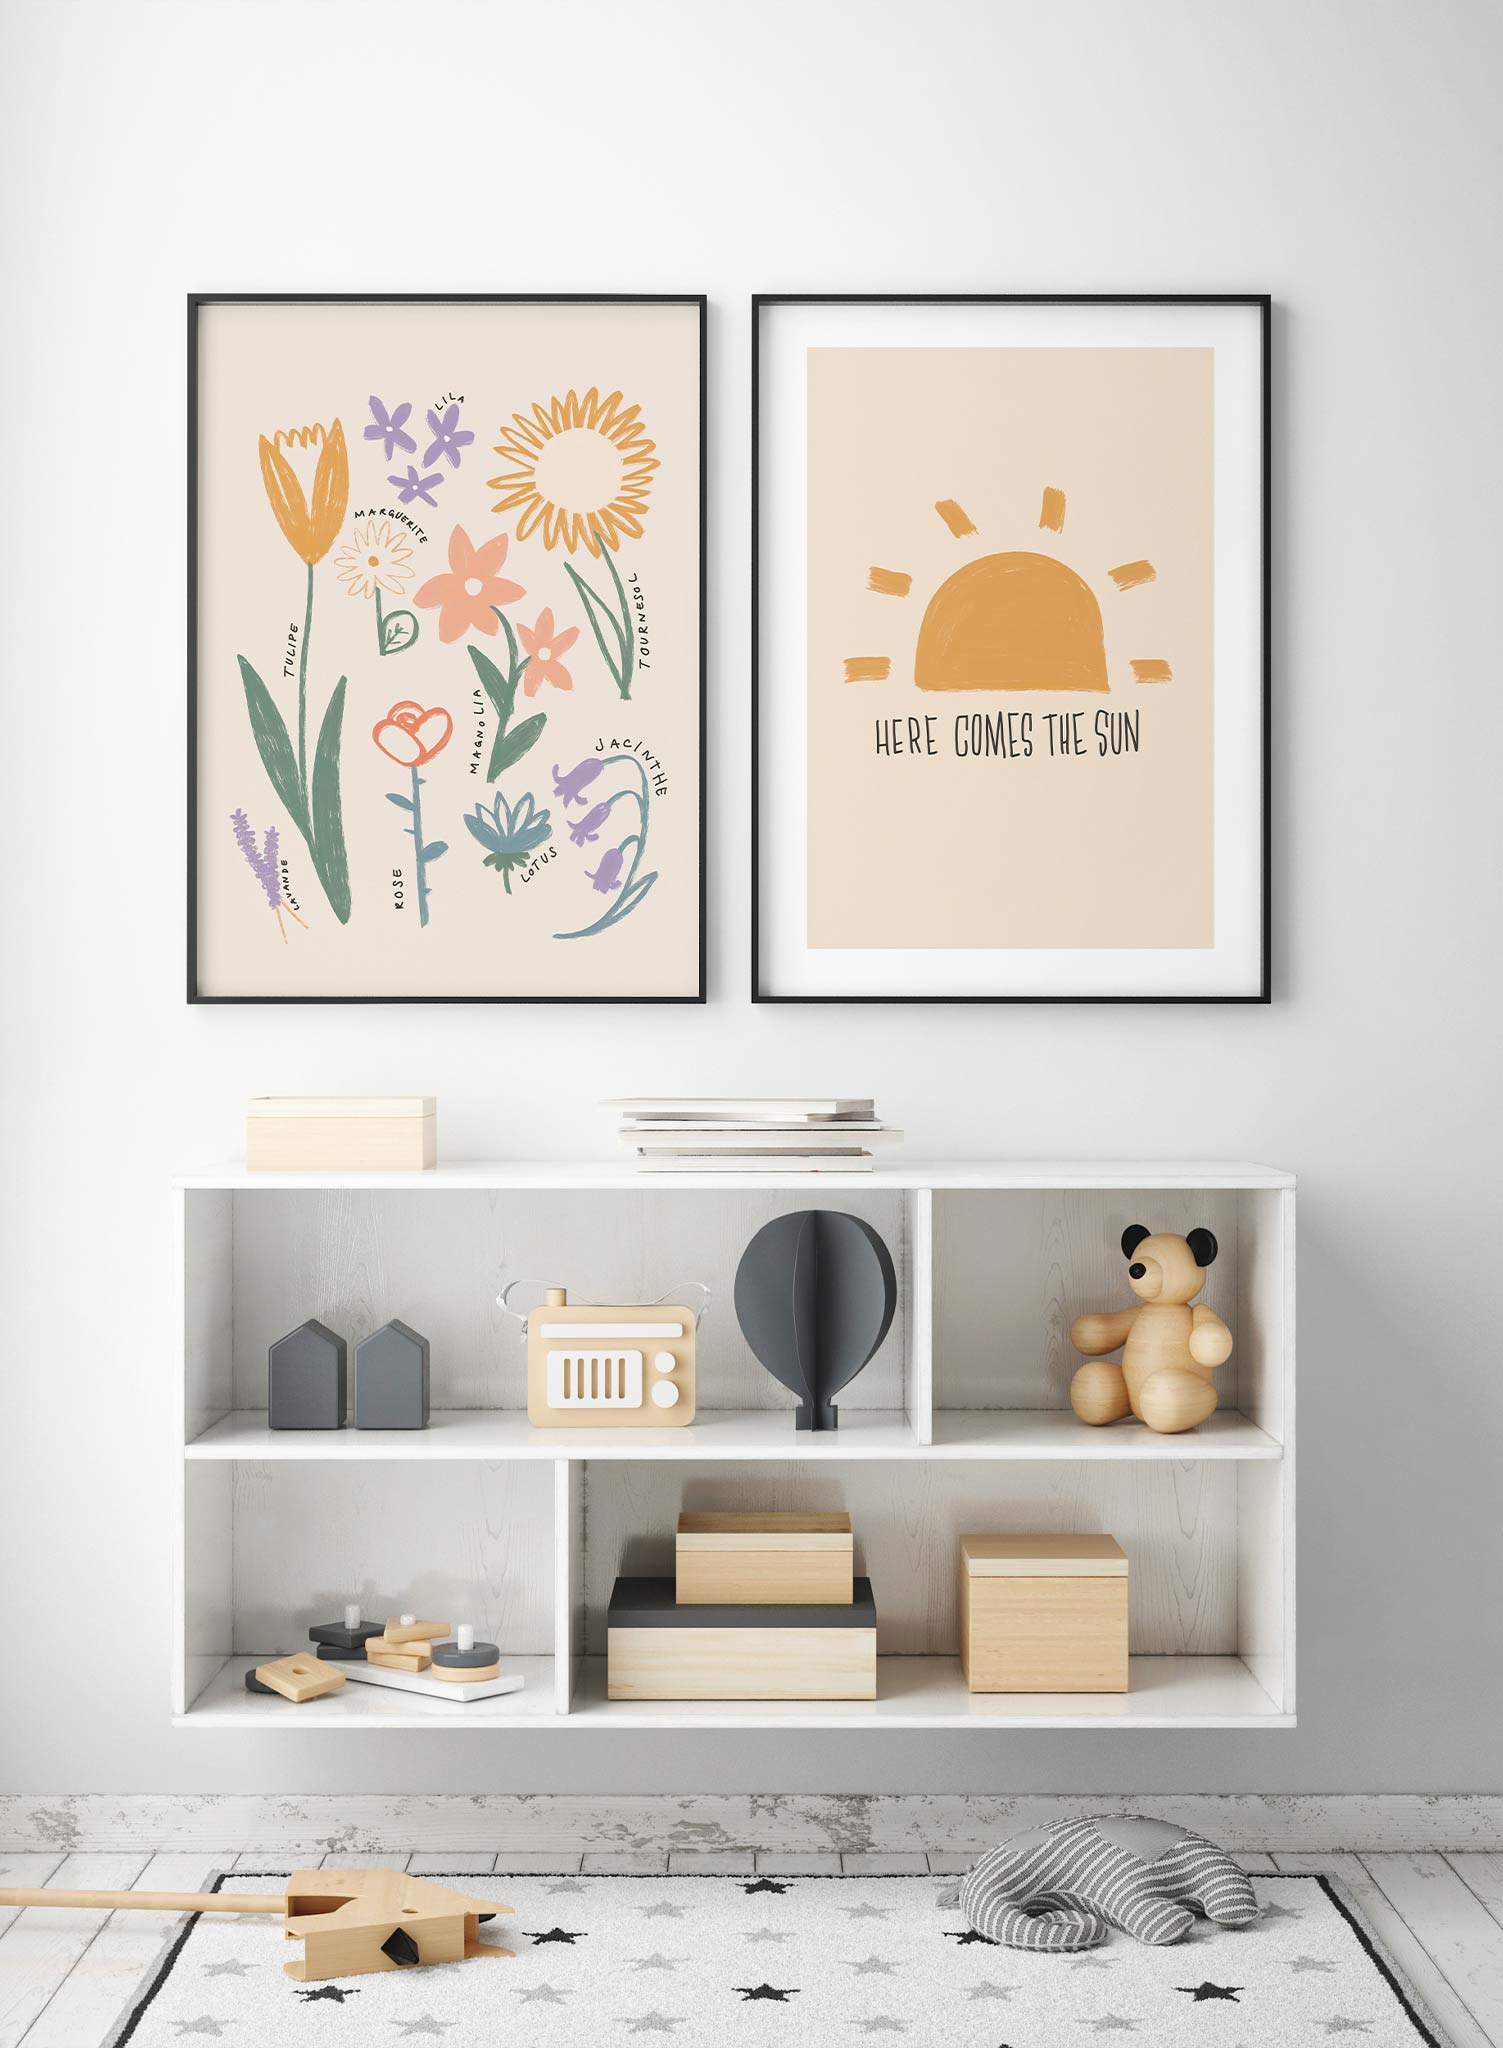 Little Gardener’s Guide in French is a minimalist illustration by Opposite Wall of various types of commonly found flowers with their names in French.